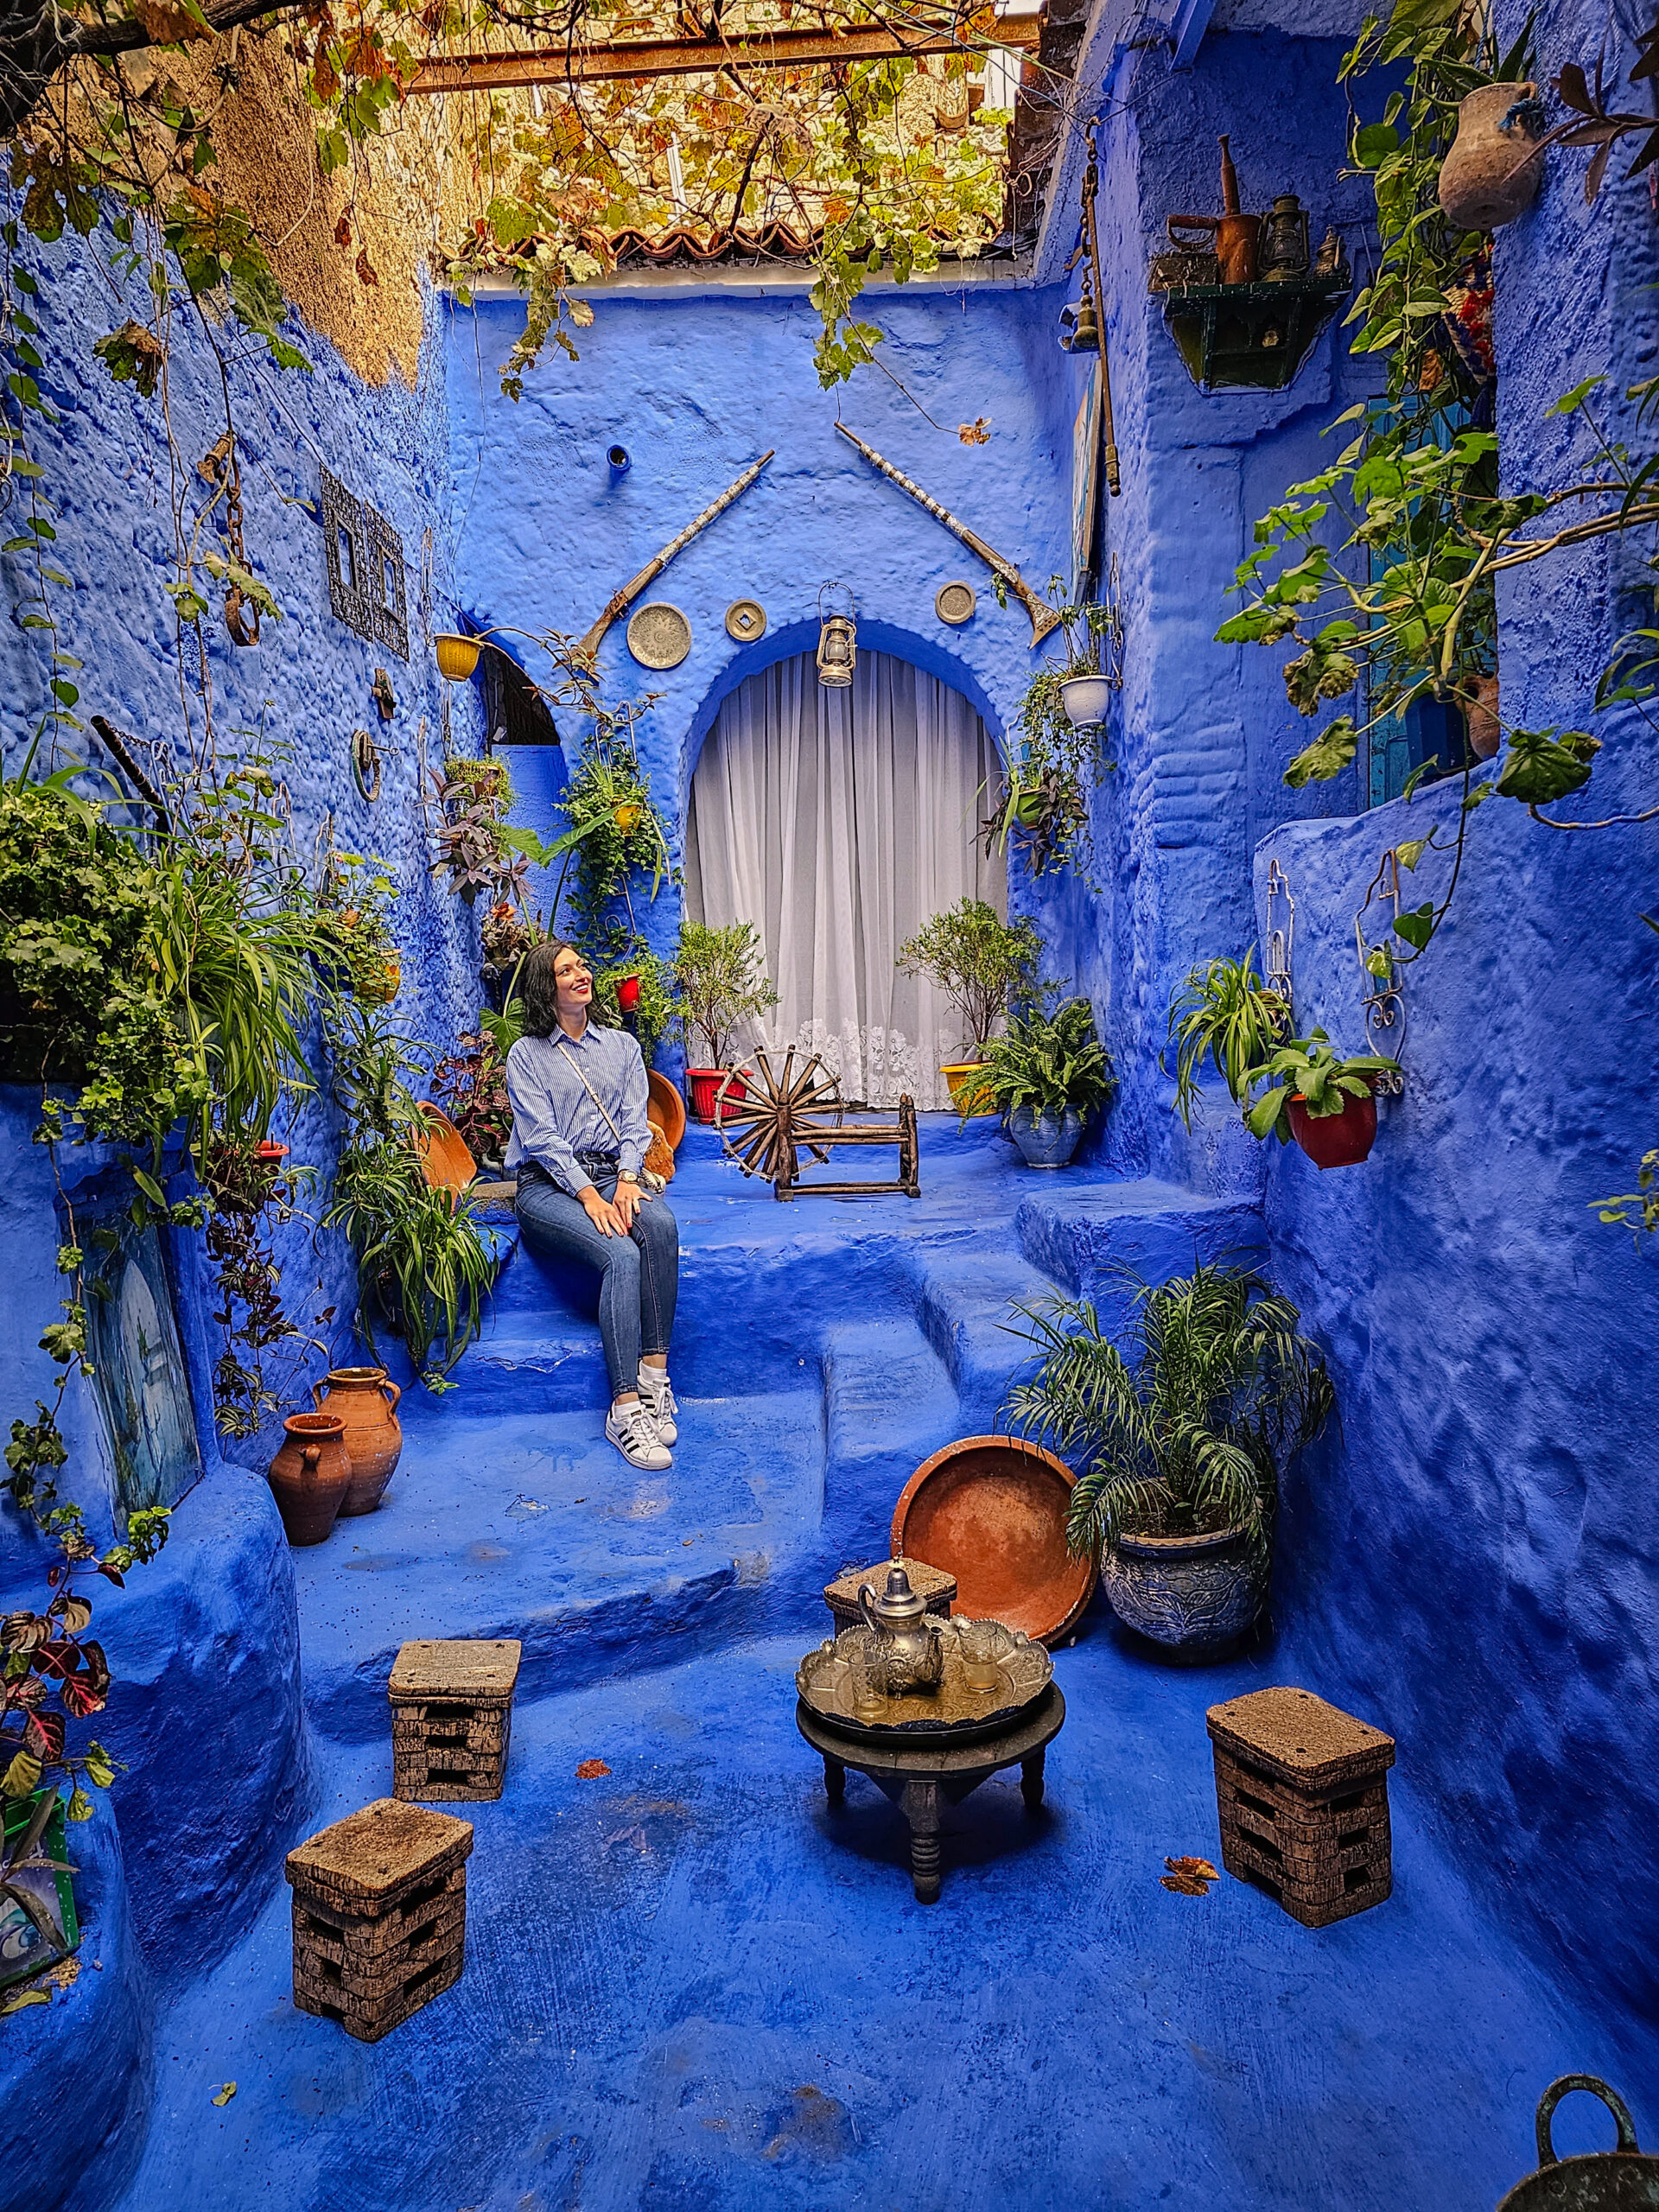 Most instagrammable places in Chefchaouen – The Blue Pearl of Morocco